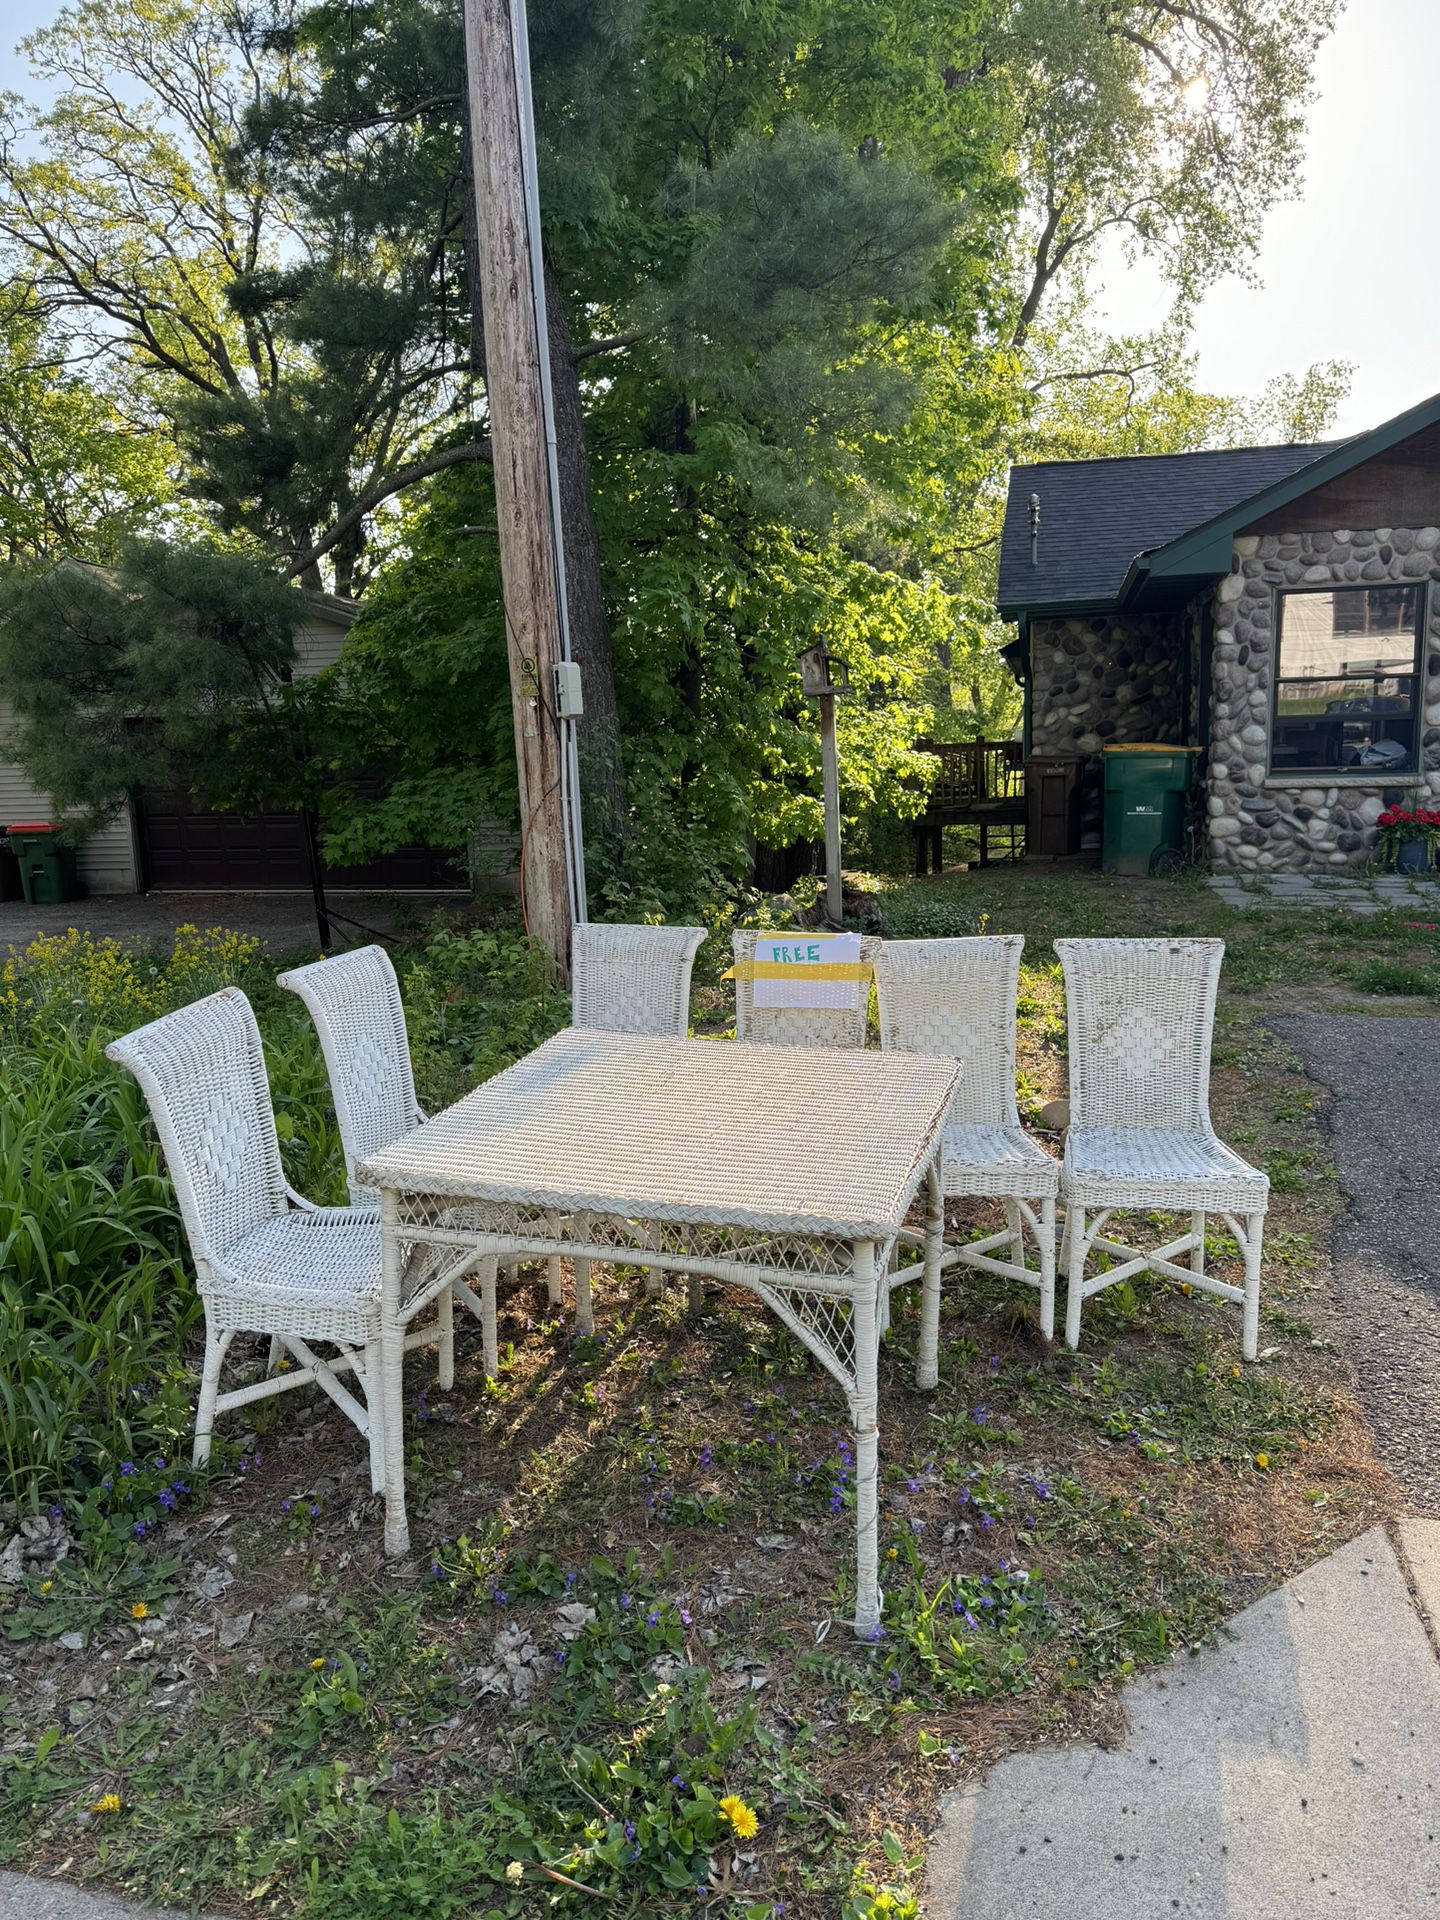 FREE outdoor Dining Set 